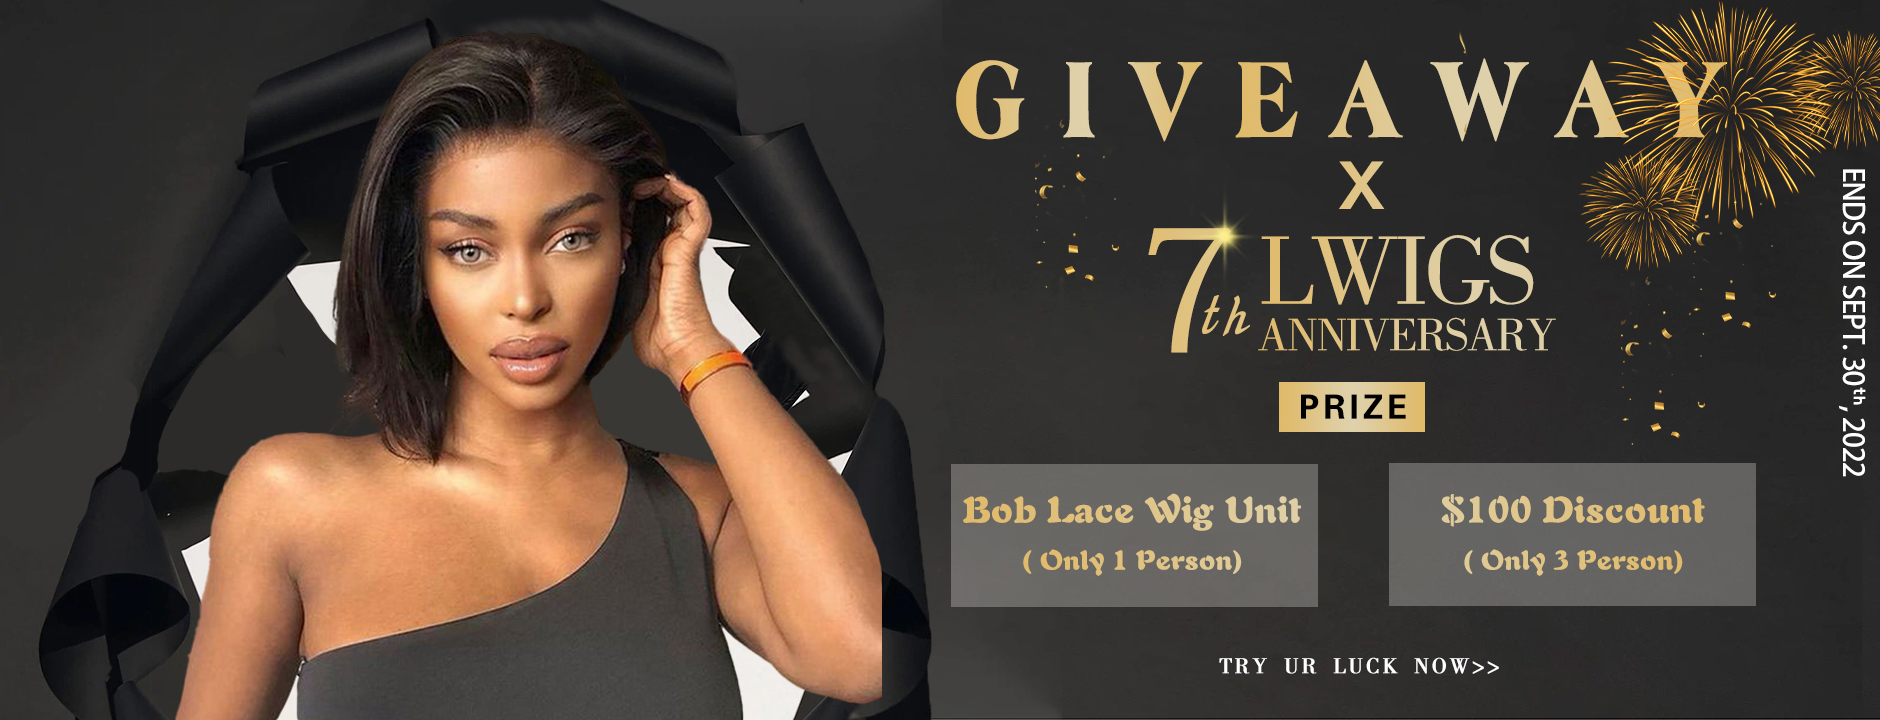 giveaway, free wig, $100 coupon, coupon, lace wig, hd lace wig, full lace wig